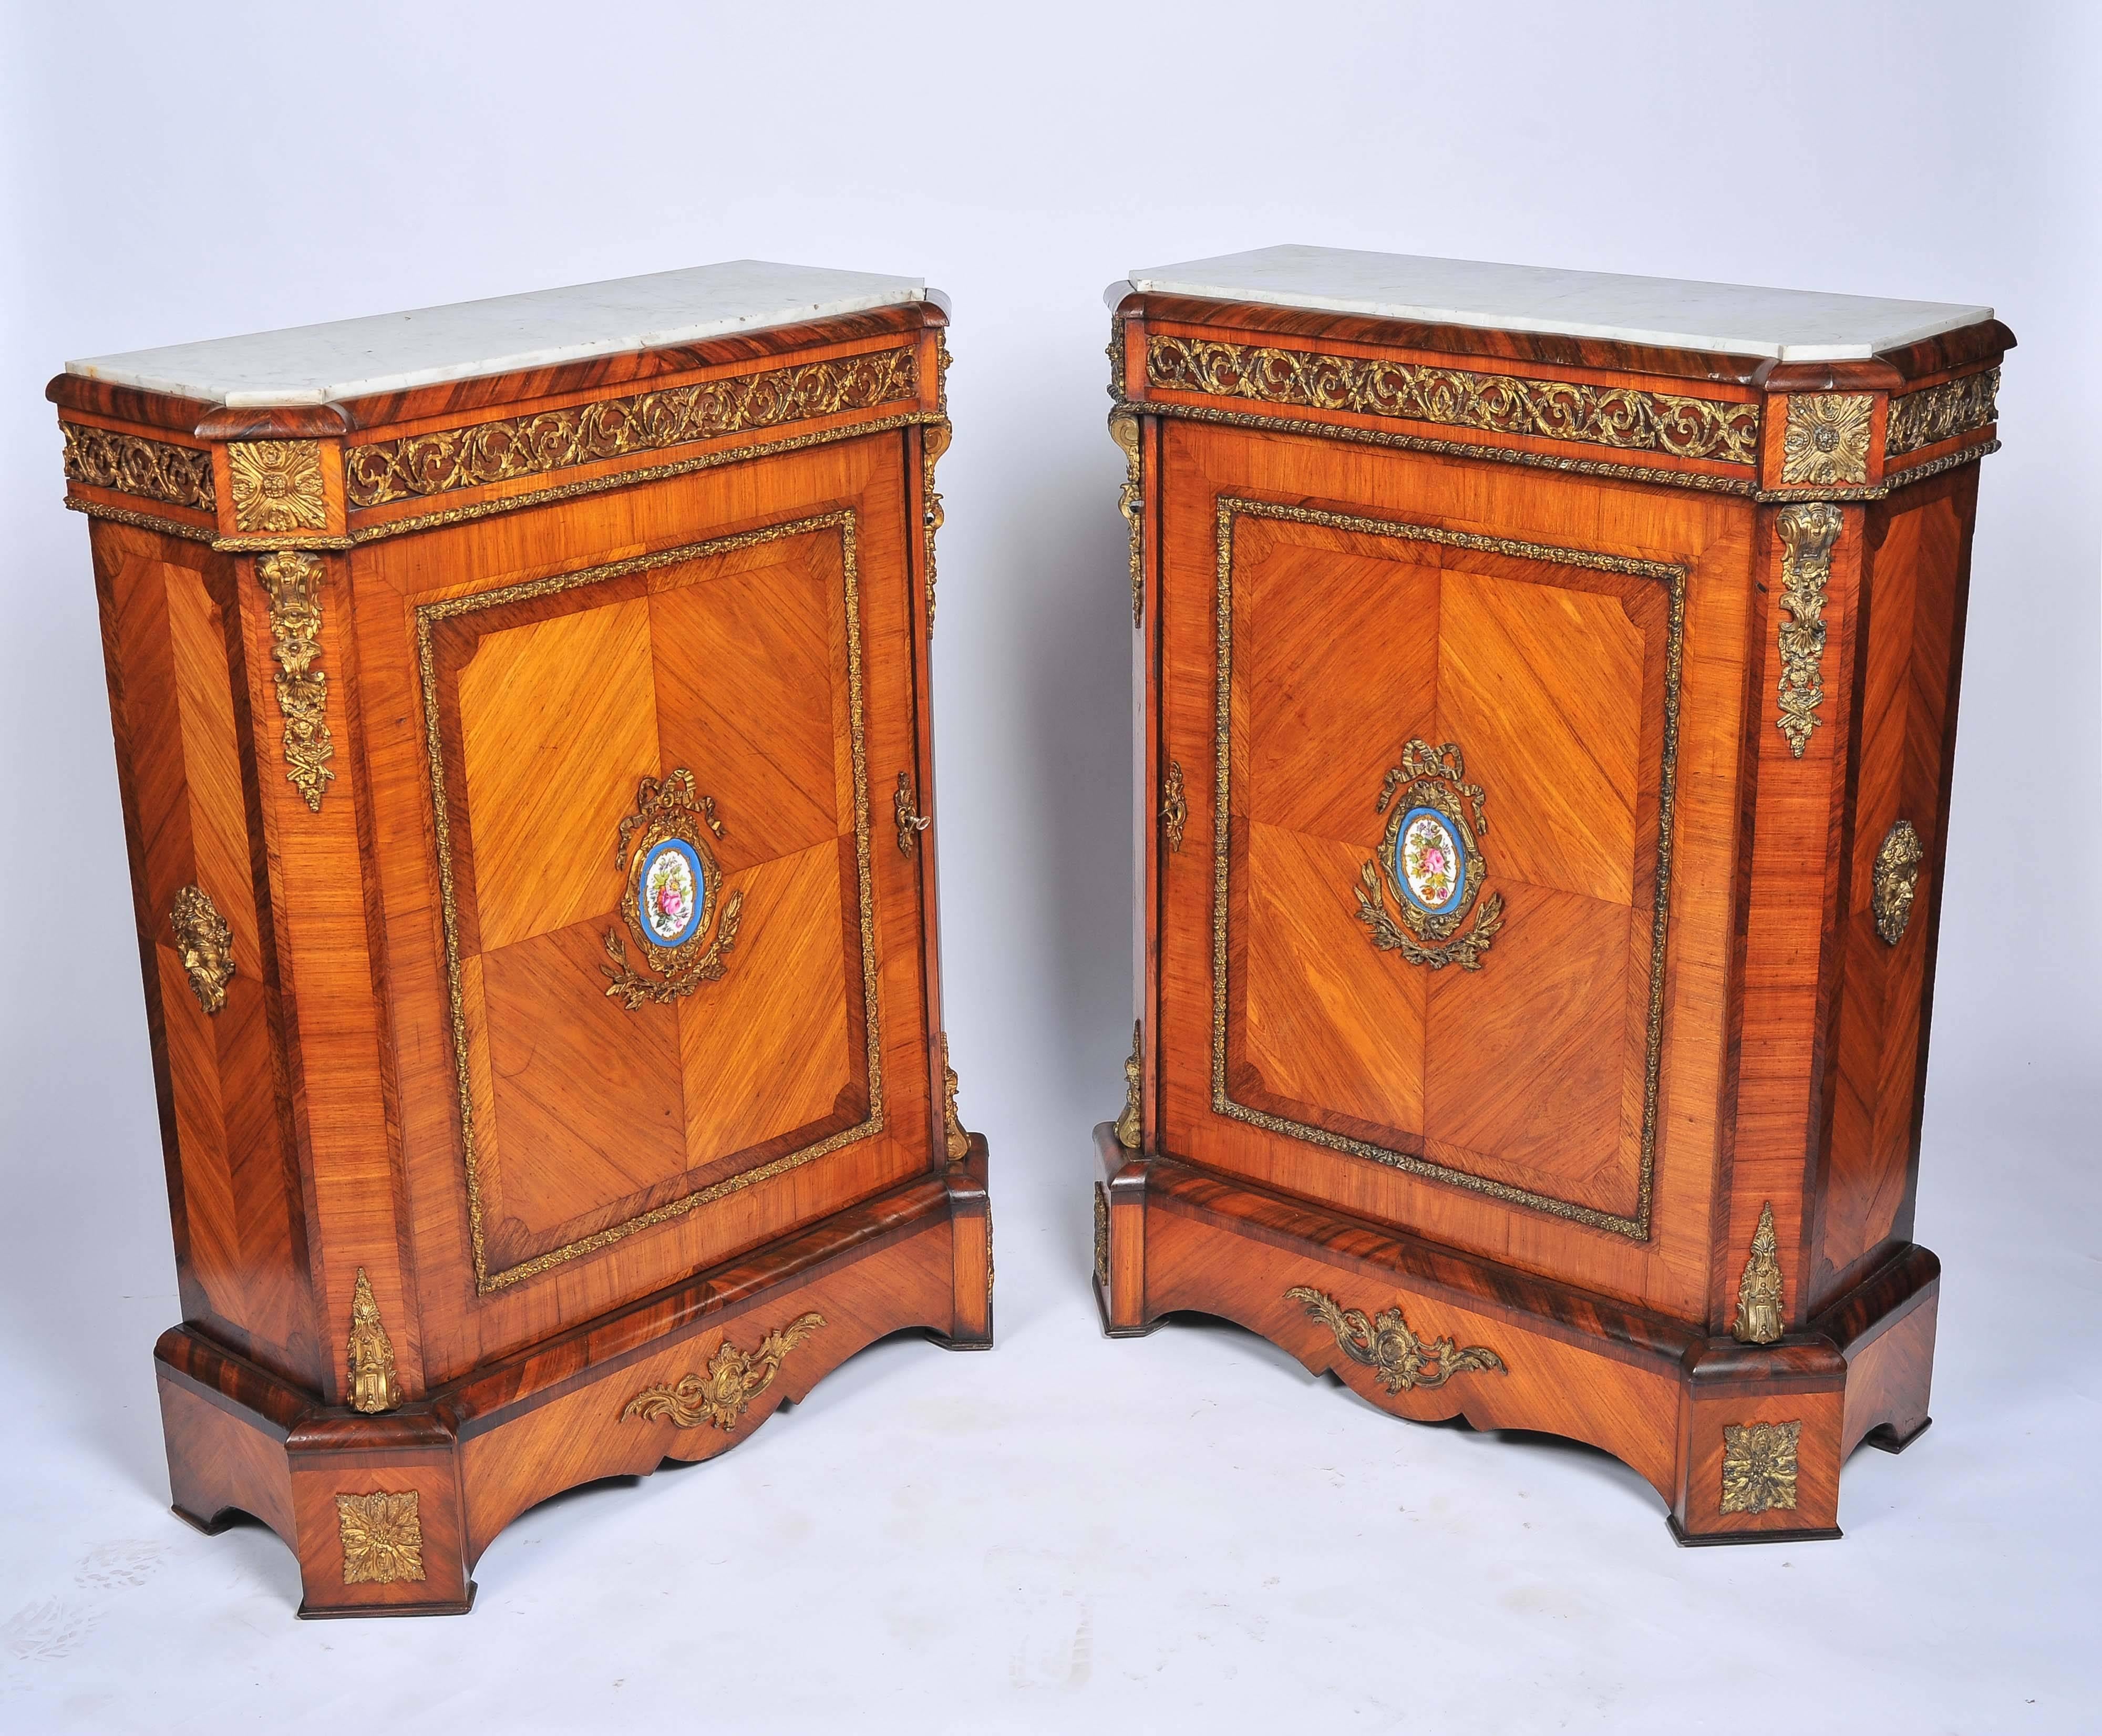 A good quality pair of 19th century French kingwood, ormolu-mounted pier cabinets, each with the original marble tops and 'Sevres' porcelain plaques to the doors.